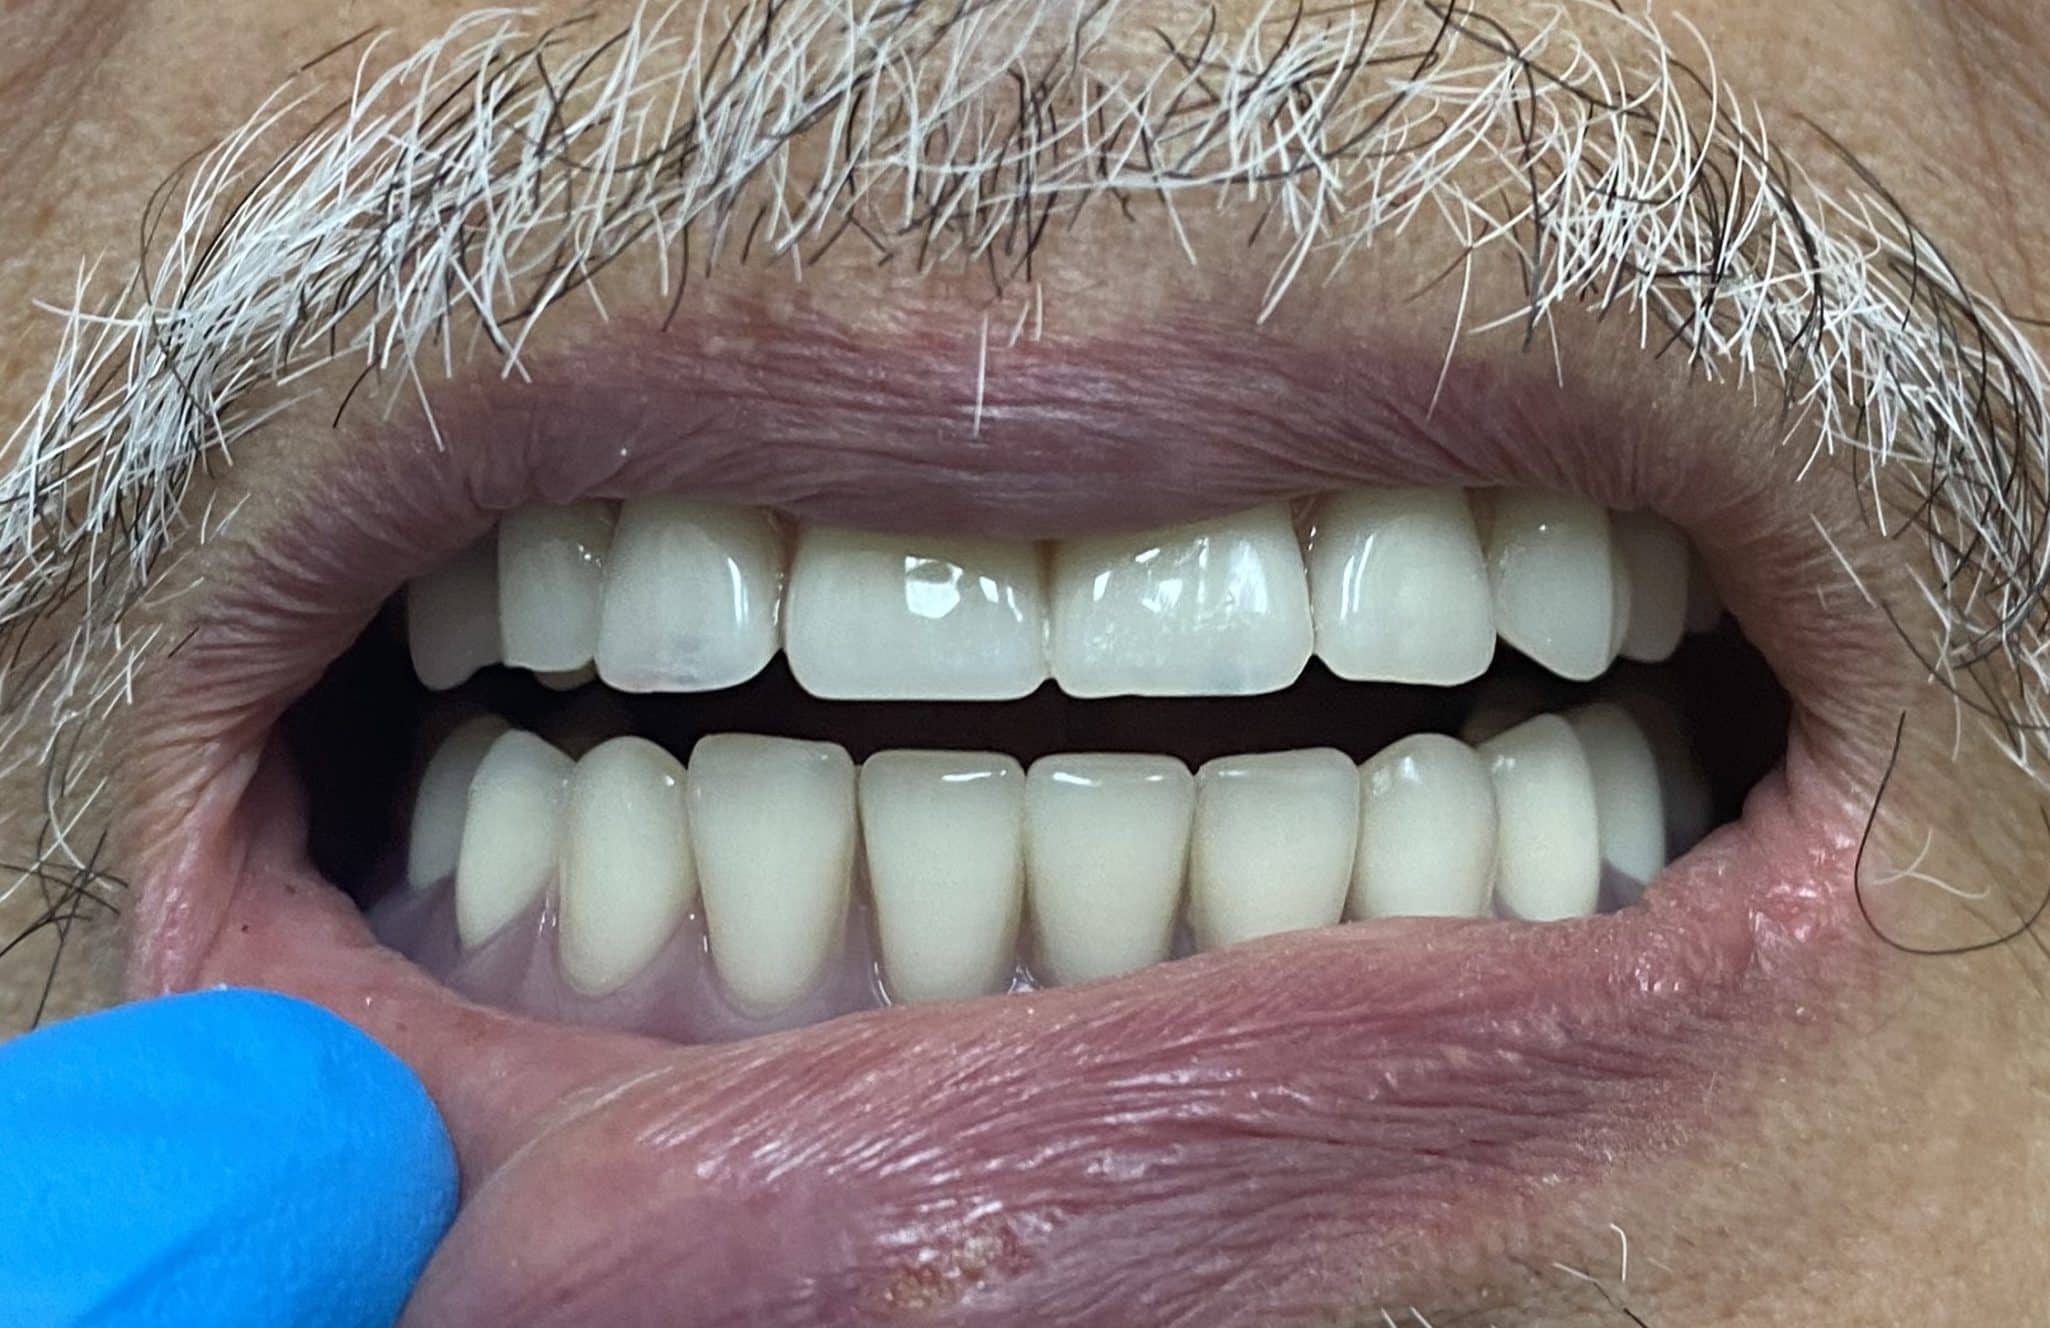 Upper Full-Arch Screw-Retained (Non-Removable) Hybrid Oral Prosthesis and Lower Implant Overdenture (Snap-on)